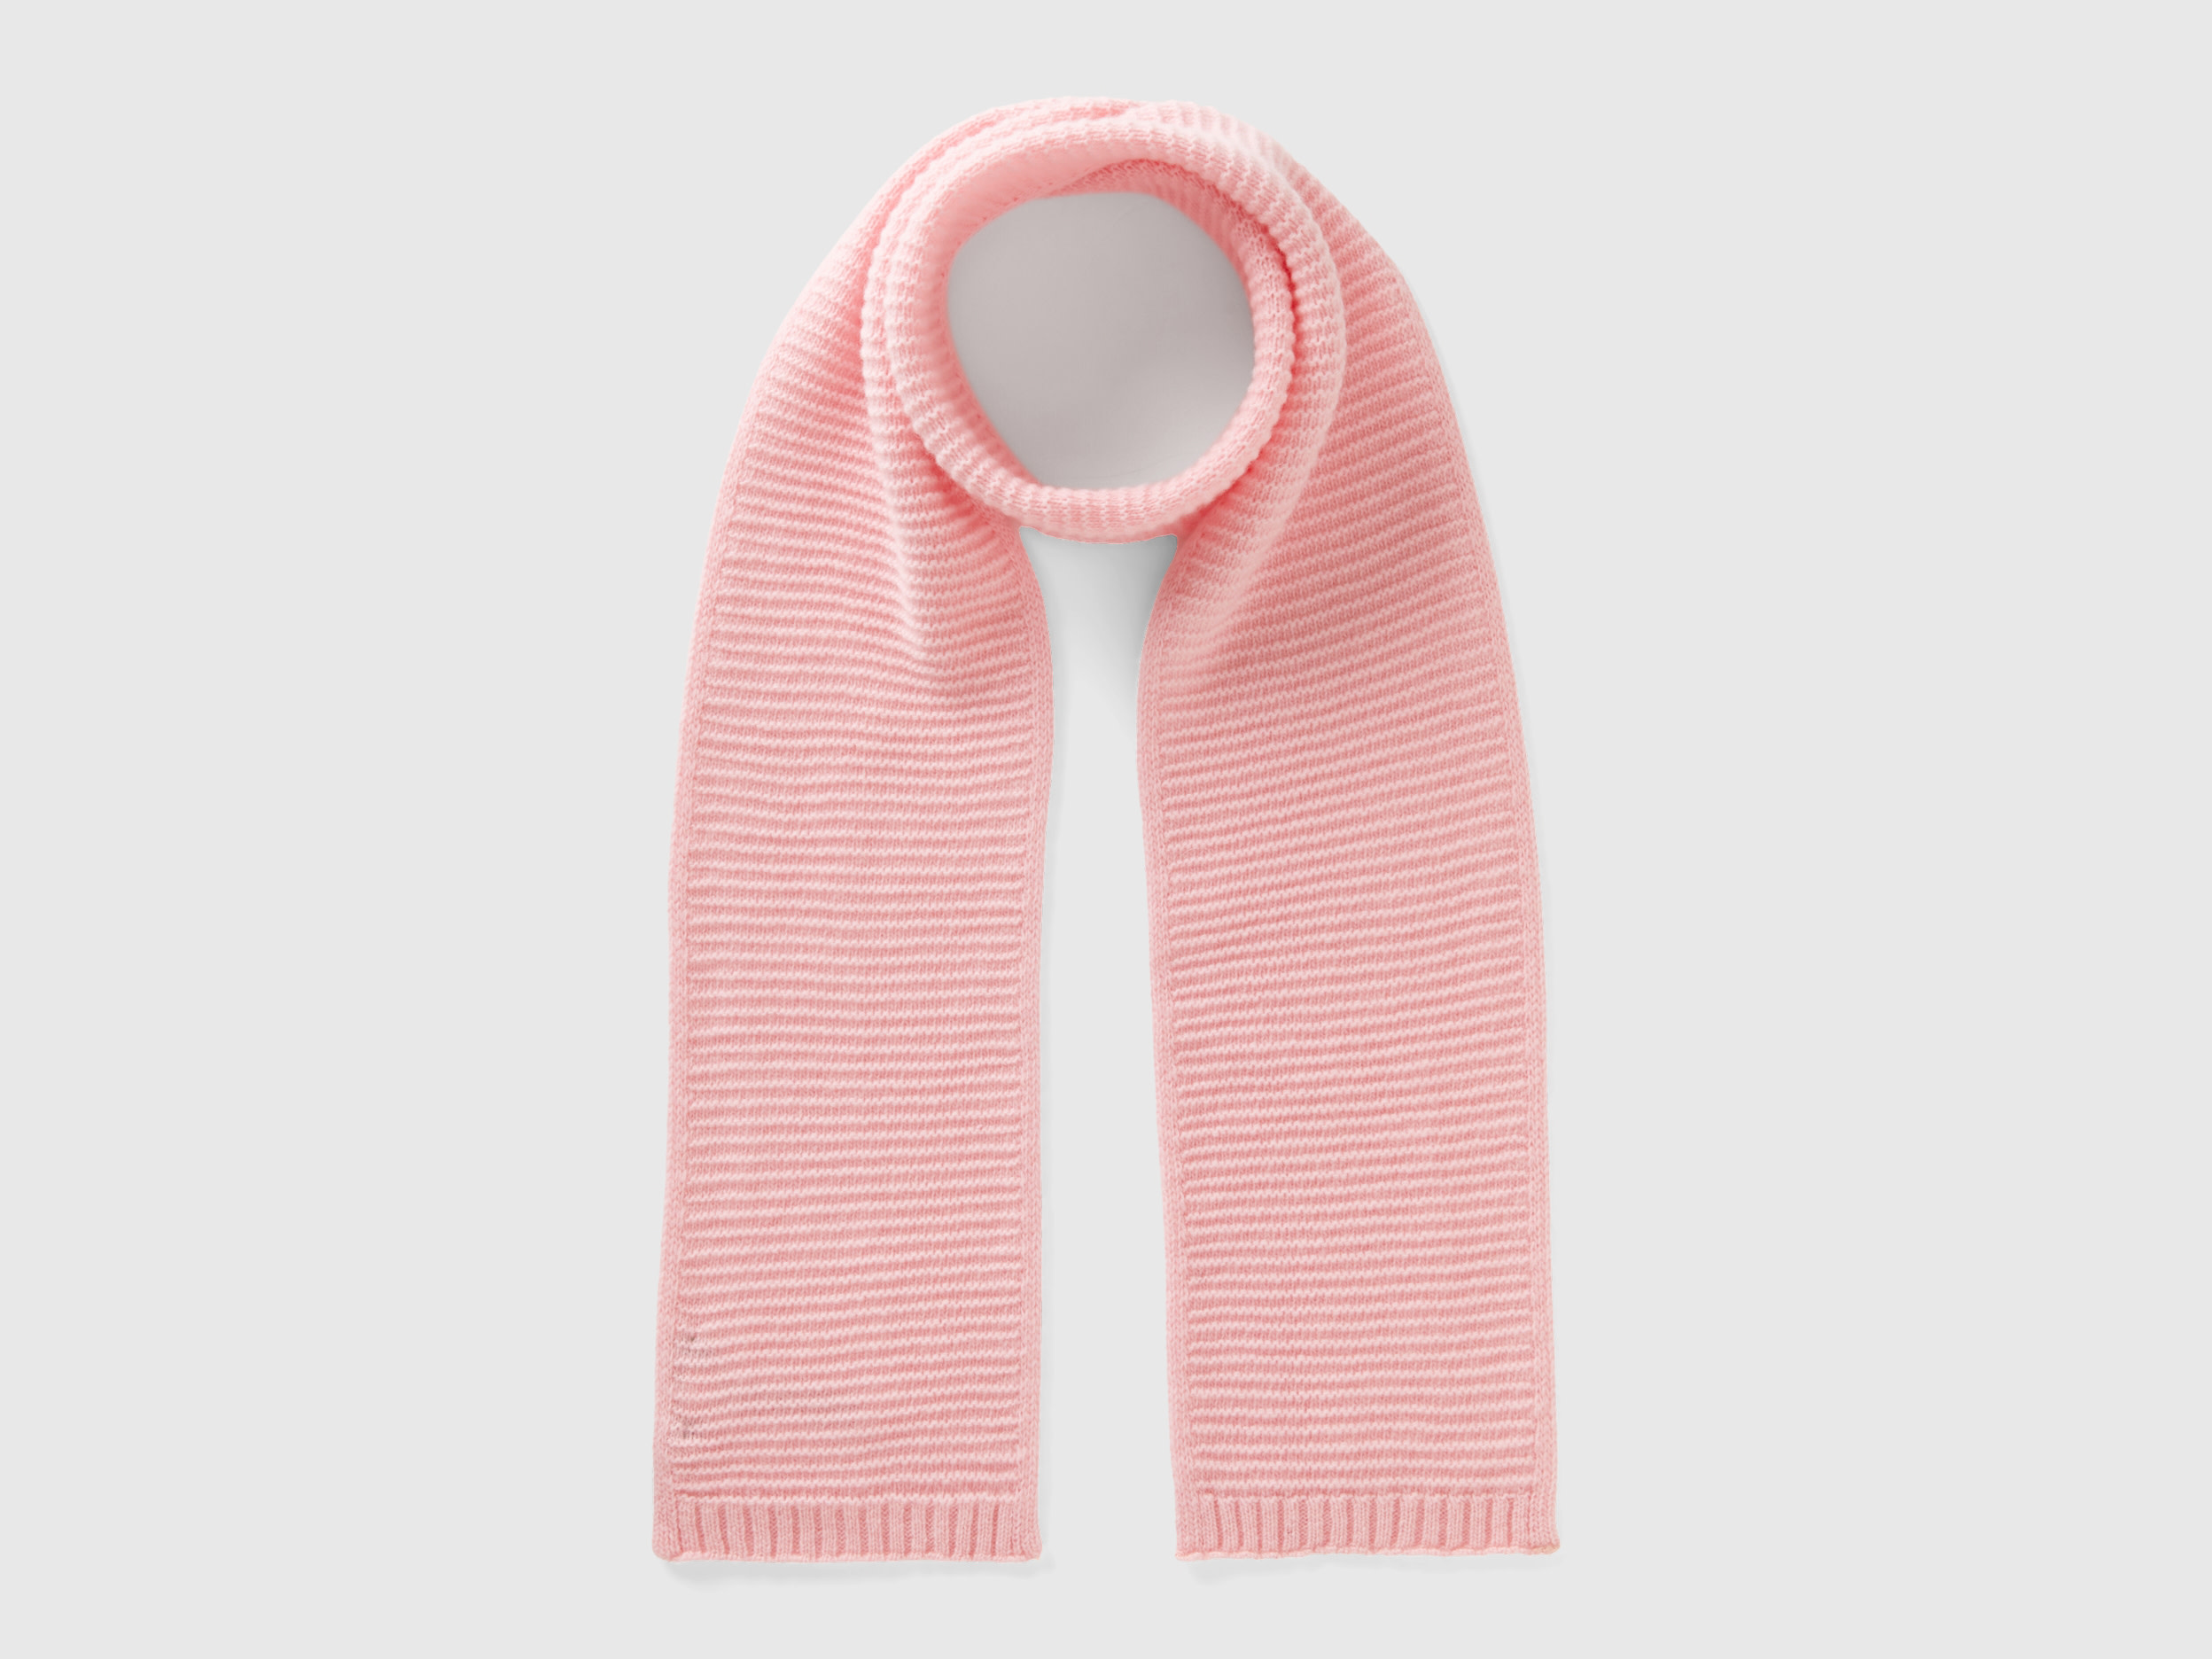 Benetton, Knit Scarf In Stretch Wool Blend, size 1-3, Pink, Kids